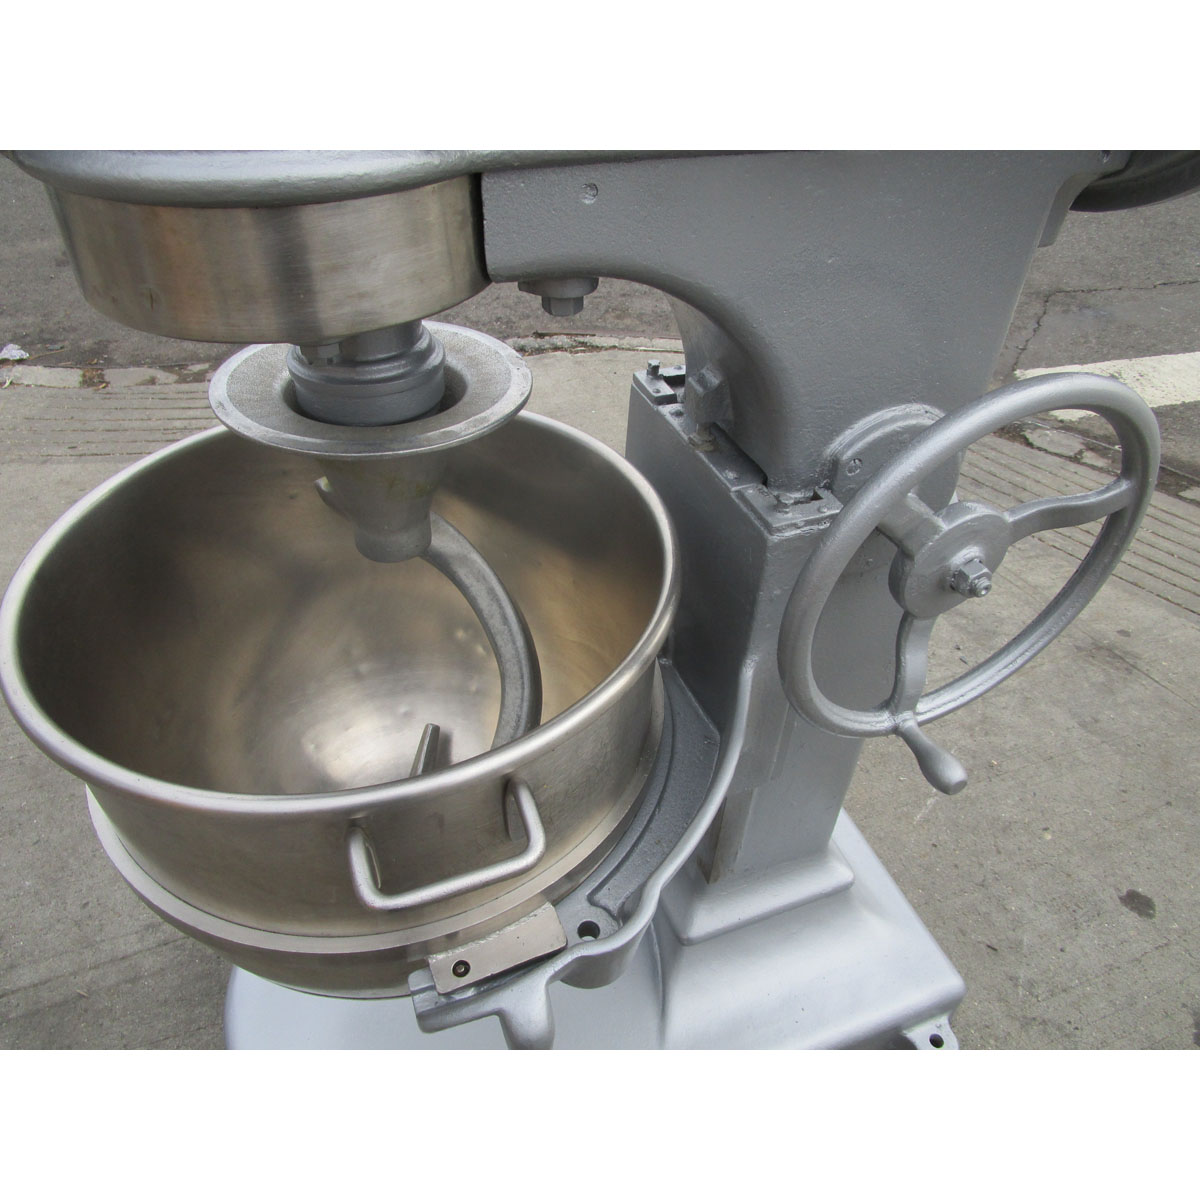 Hobart M80 80 Quart Mixer, Used Great Condition image 5